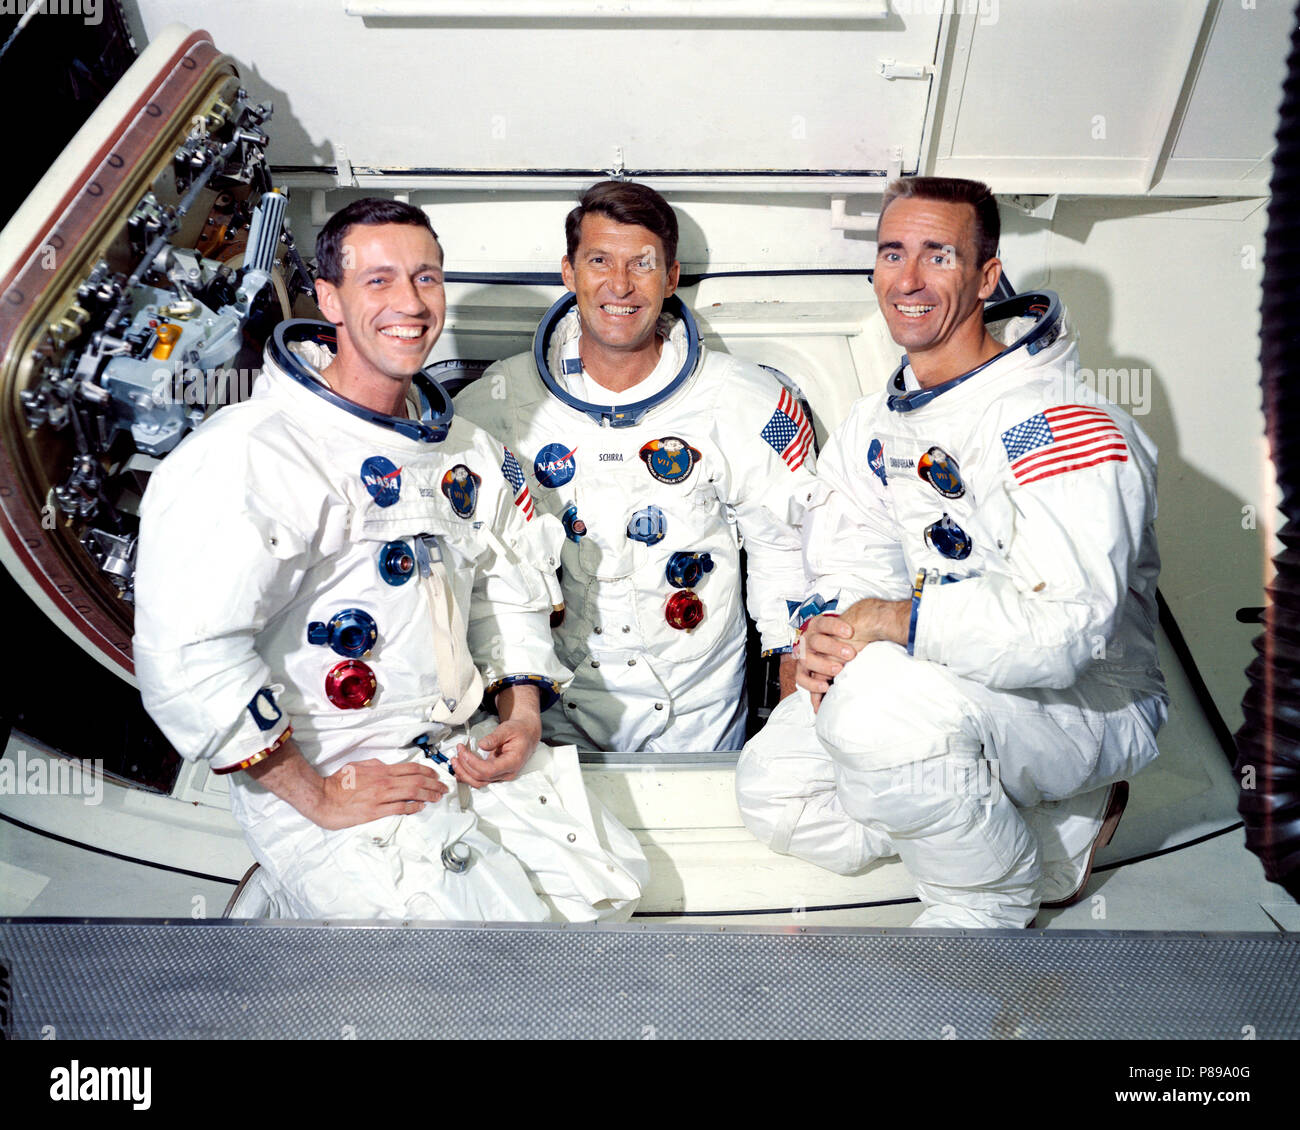 Prime crew of the first manned Apollo space mission, Apollo 7 (Spacecraft 101Saturn 205), L to R are Donn F. Eisele, Walter M. Schirra Jr. and Walter Cunningh Stock Photo